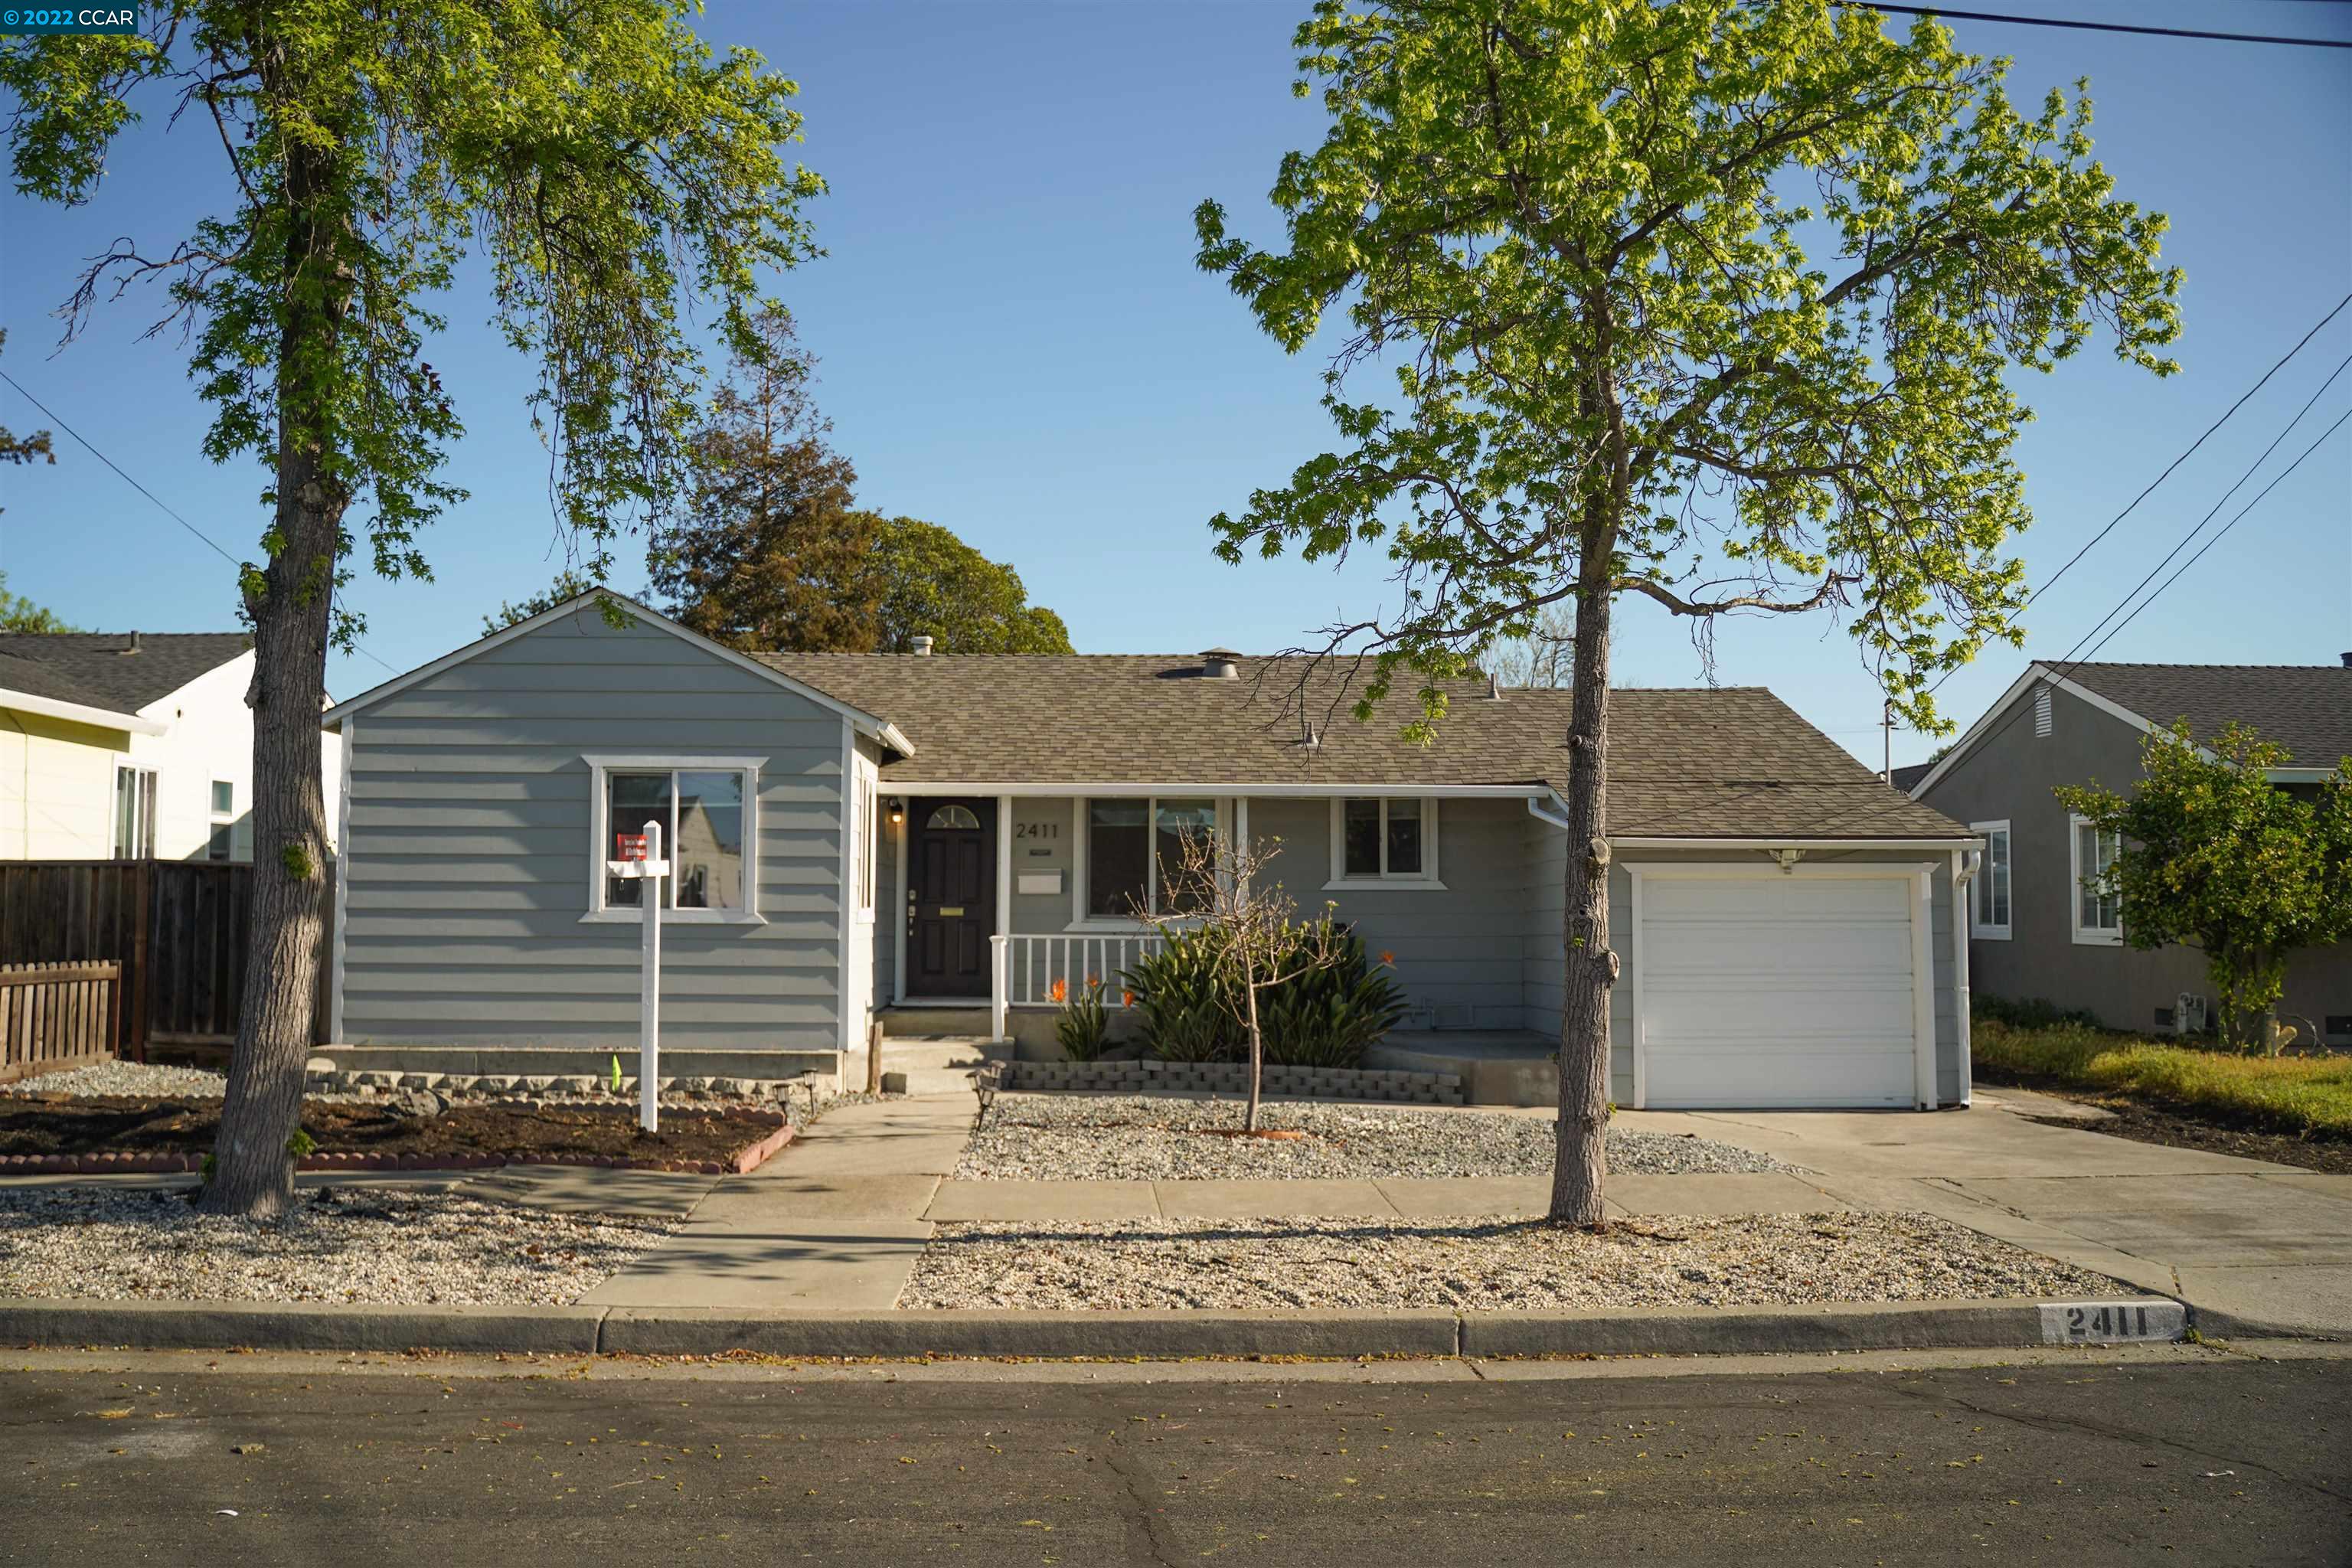 Photo of 2411 Upland Dr in Concord, CA